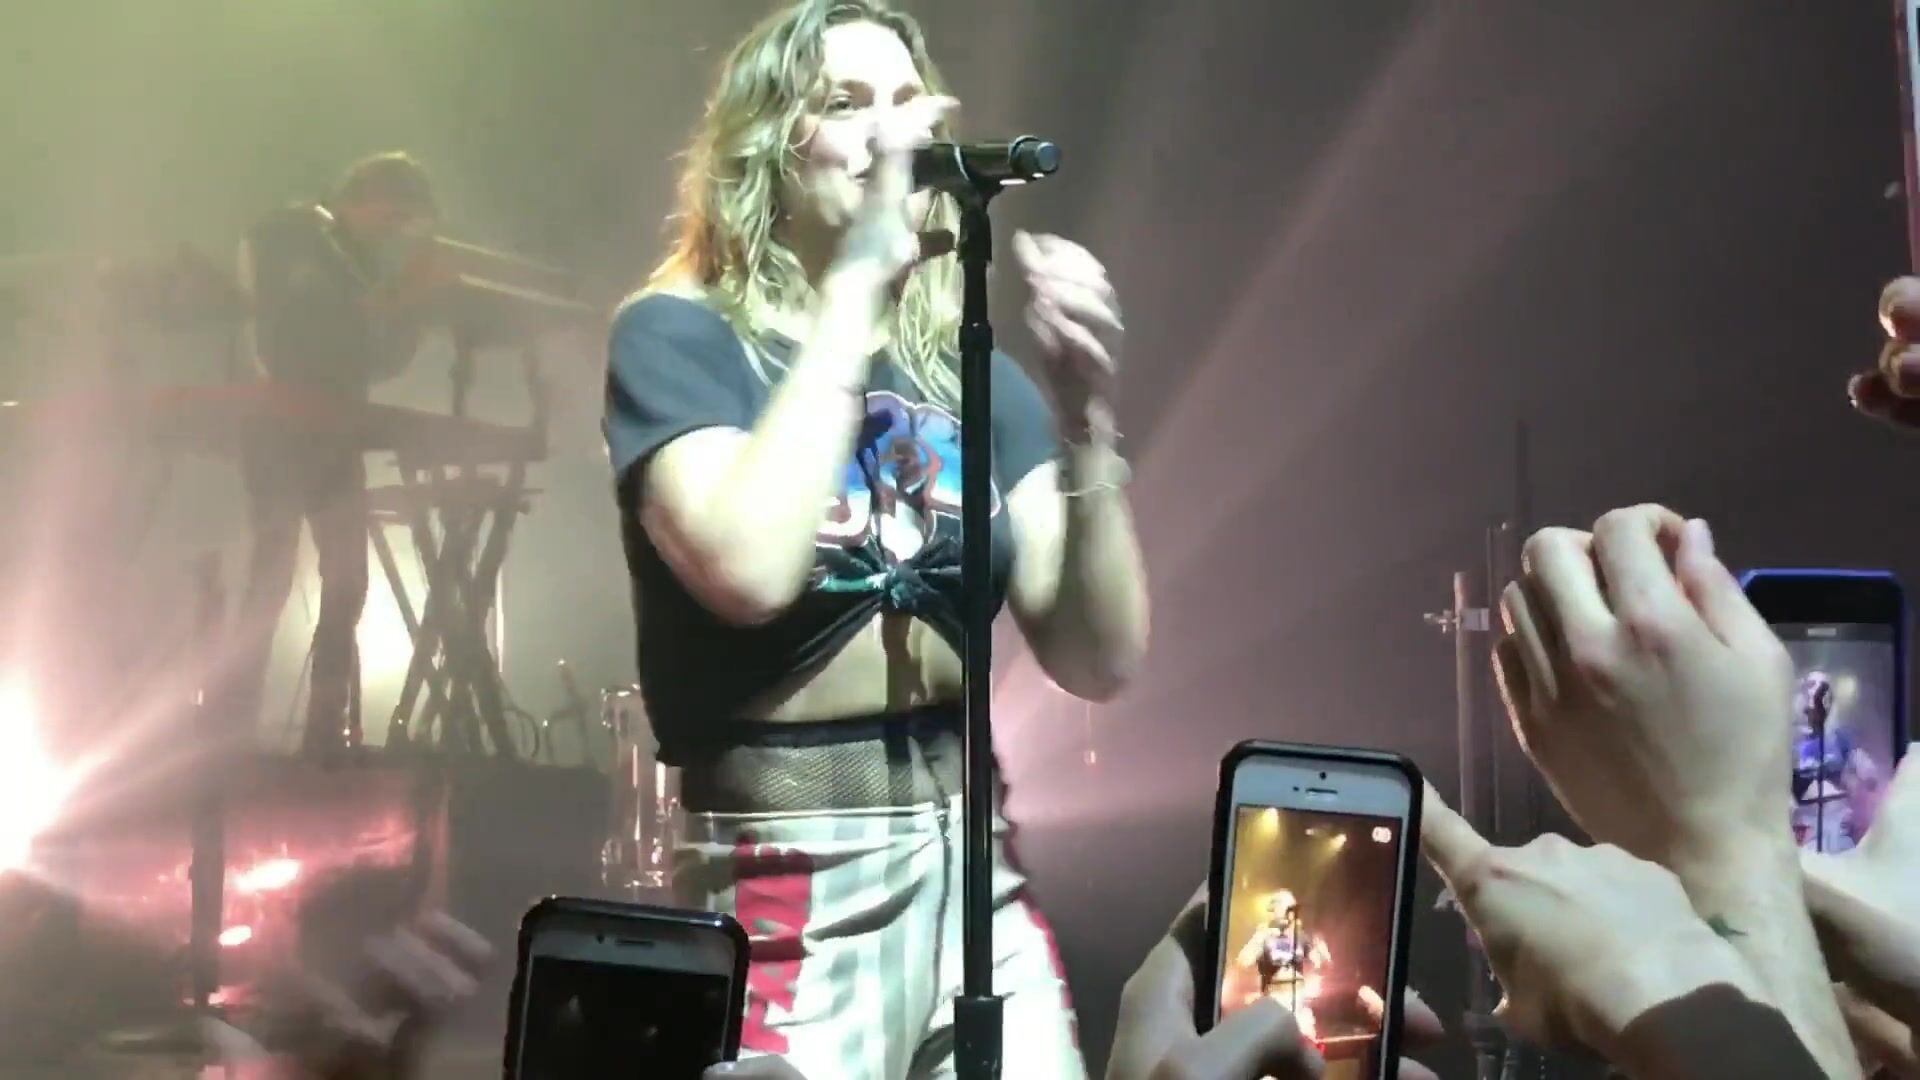 Eros Concert moments full of shame and excitement when Tove Lo nude exposes boobies on stage FutaToon